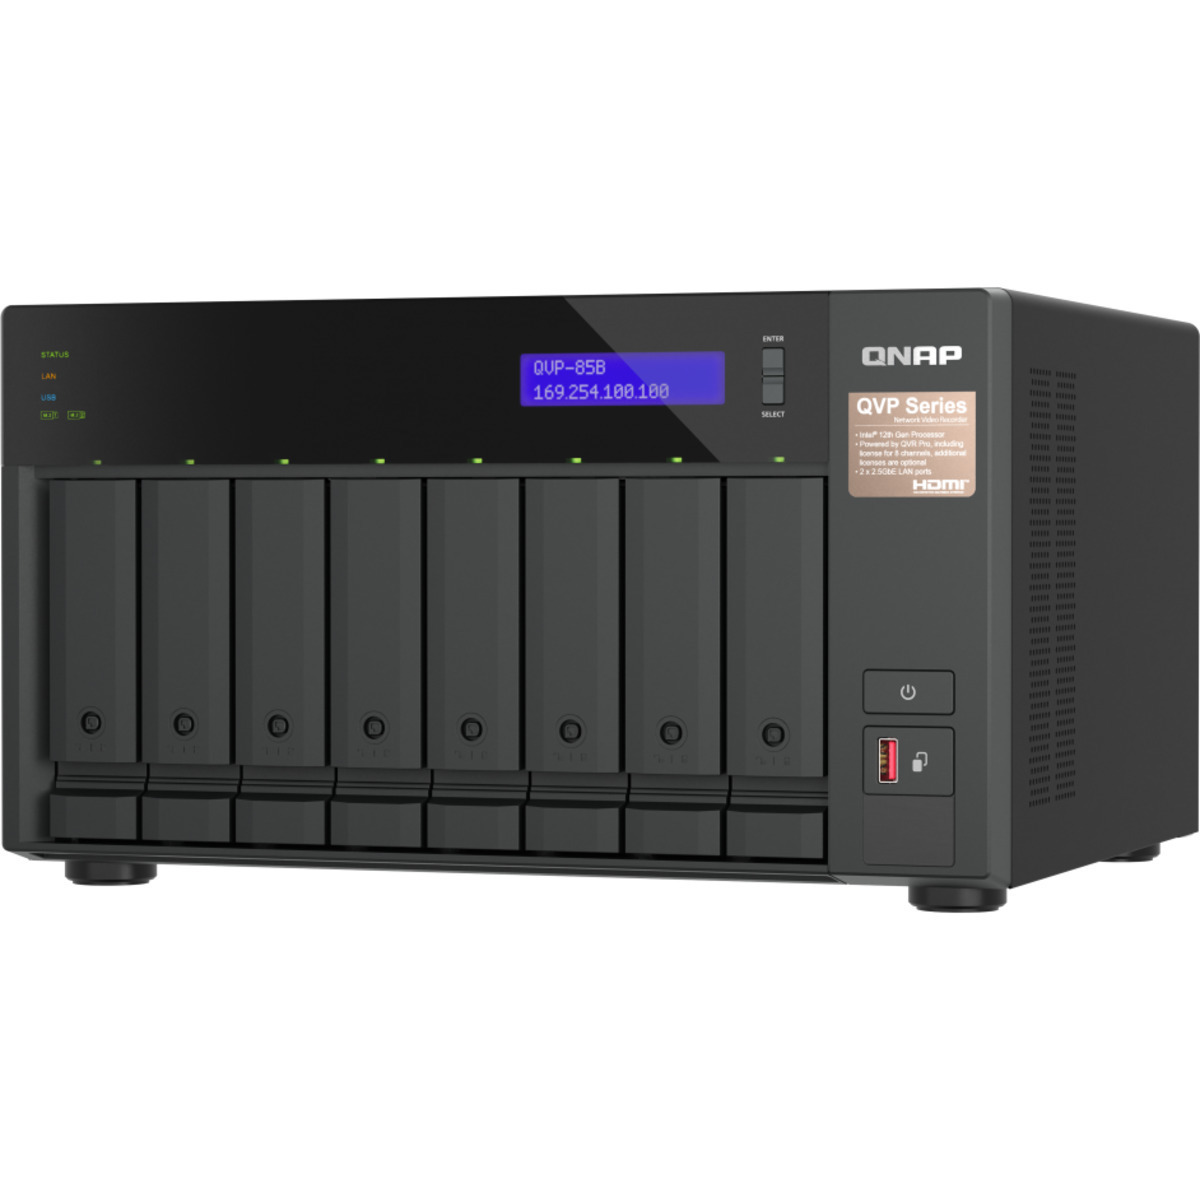 QNAP QVP-85B 96tb 8-Bay Desktop Multimedia / Power User / Business NVR - Network Video Recorder 4x24tb Seagate IronWolf Pro ST24000NT002 3.5 7200rpm SATA 6Gb/s HDD NAS Class Drives Installed - Burn-In Tested QVP-85B